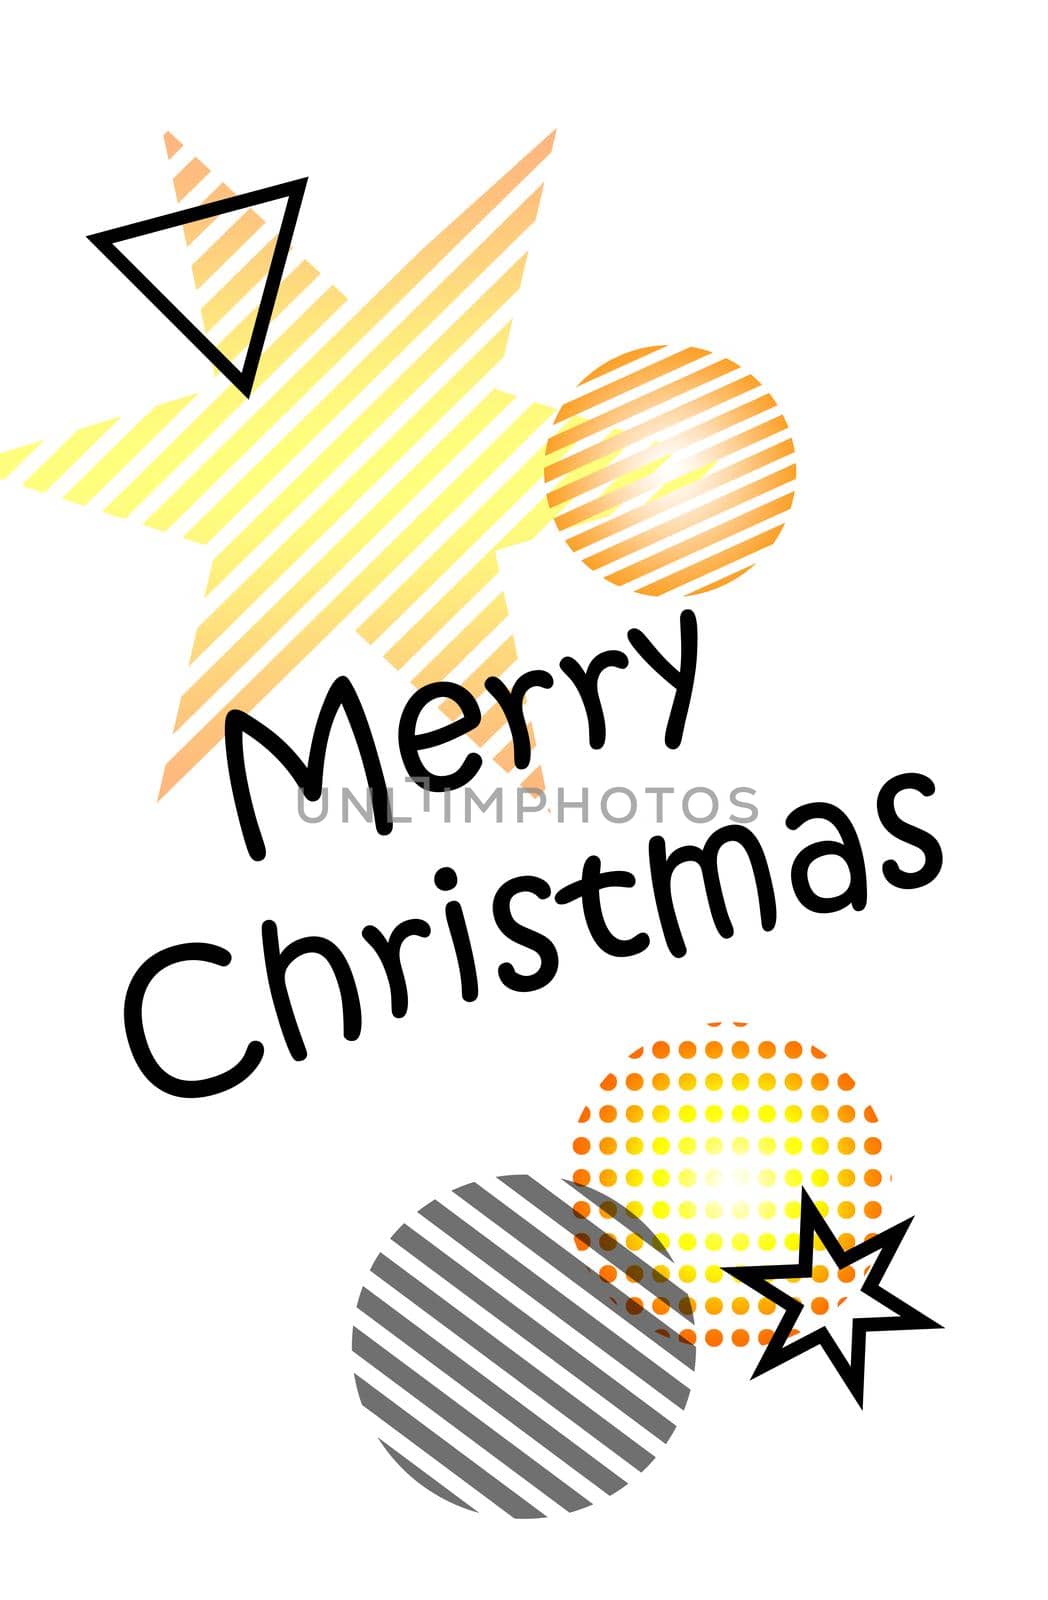 Happy New Year. Merry Christmas. Illustration festive with Christmas balls, stars. On a white background, gray and yellow Christmas decorations. Grey and yellow balls in stripes